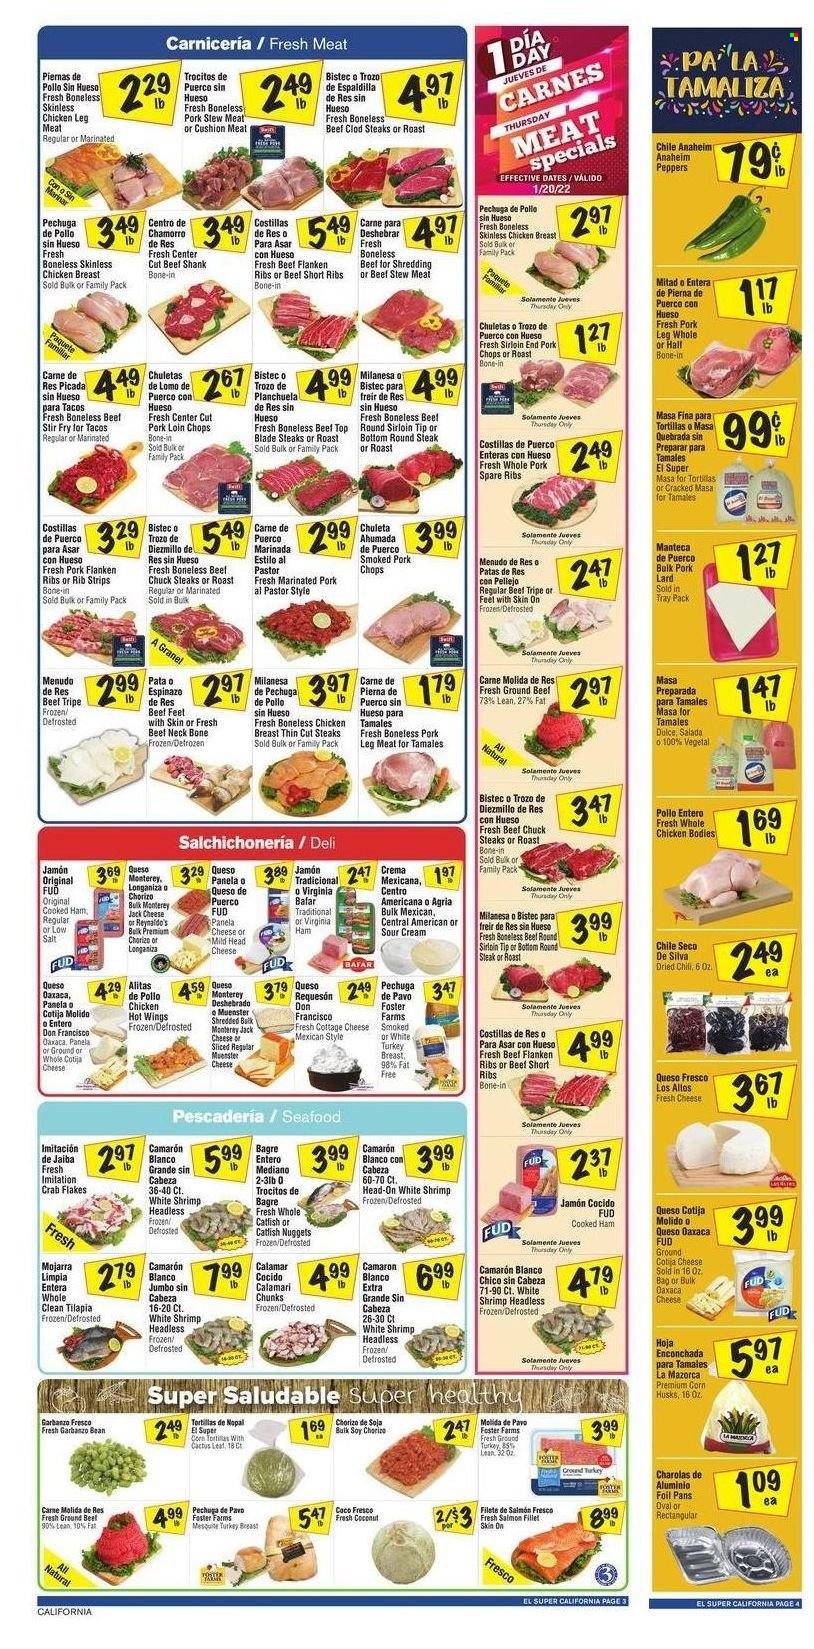 thumbnail - El Super Flyer - 01/19/2022 - 01/25/2022 - Sales products - stew meat, tortillas, corn, peppers, coconut, calamari, catfish, salmon, salmon fillet, tilapia, seafood, crab, shrimps, nuggets, cooked ham, ham, chorizo, virginia ham, cottage cheese, Monterey Jack cheese, queso fresco, Münster cheese, Panela cheese, lard, sour cream, strips, hoja enconchada, turkey breast, whole chicken, chicken breasts, chicken legs, beef meat, beef ribs, beef shank, beef tripe, steak, round steak, pork chops, pork meat, pork ribs, pork spare ribs, pork leg, marinated pork. Page 4.